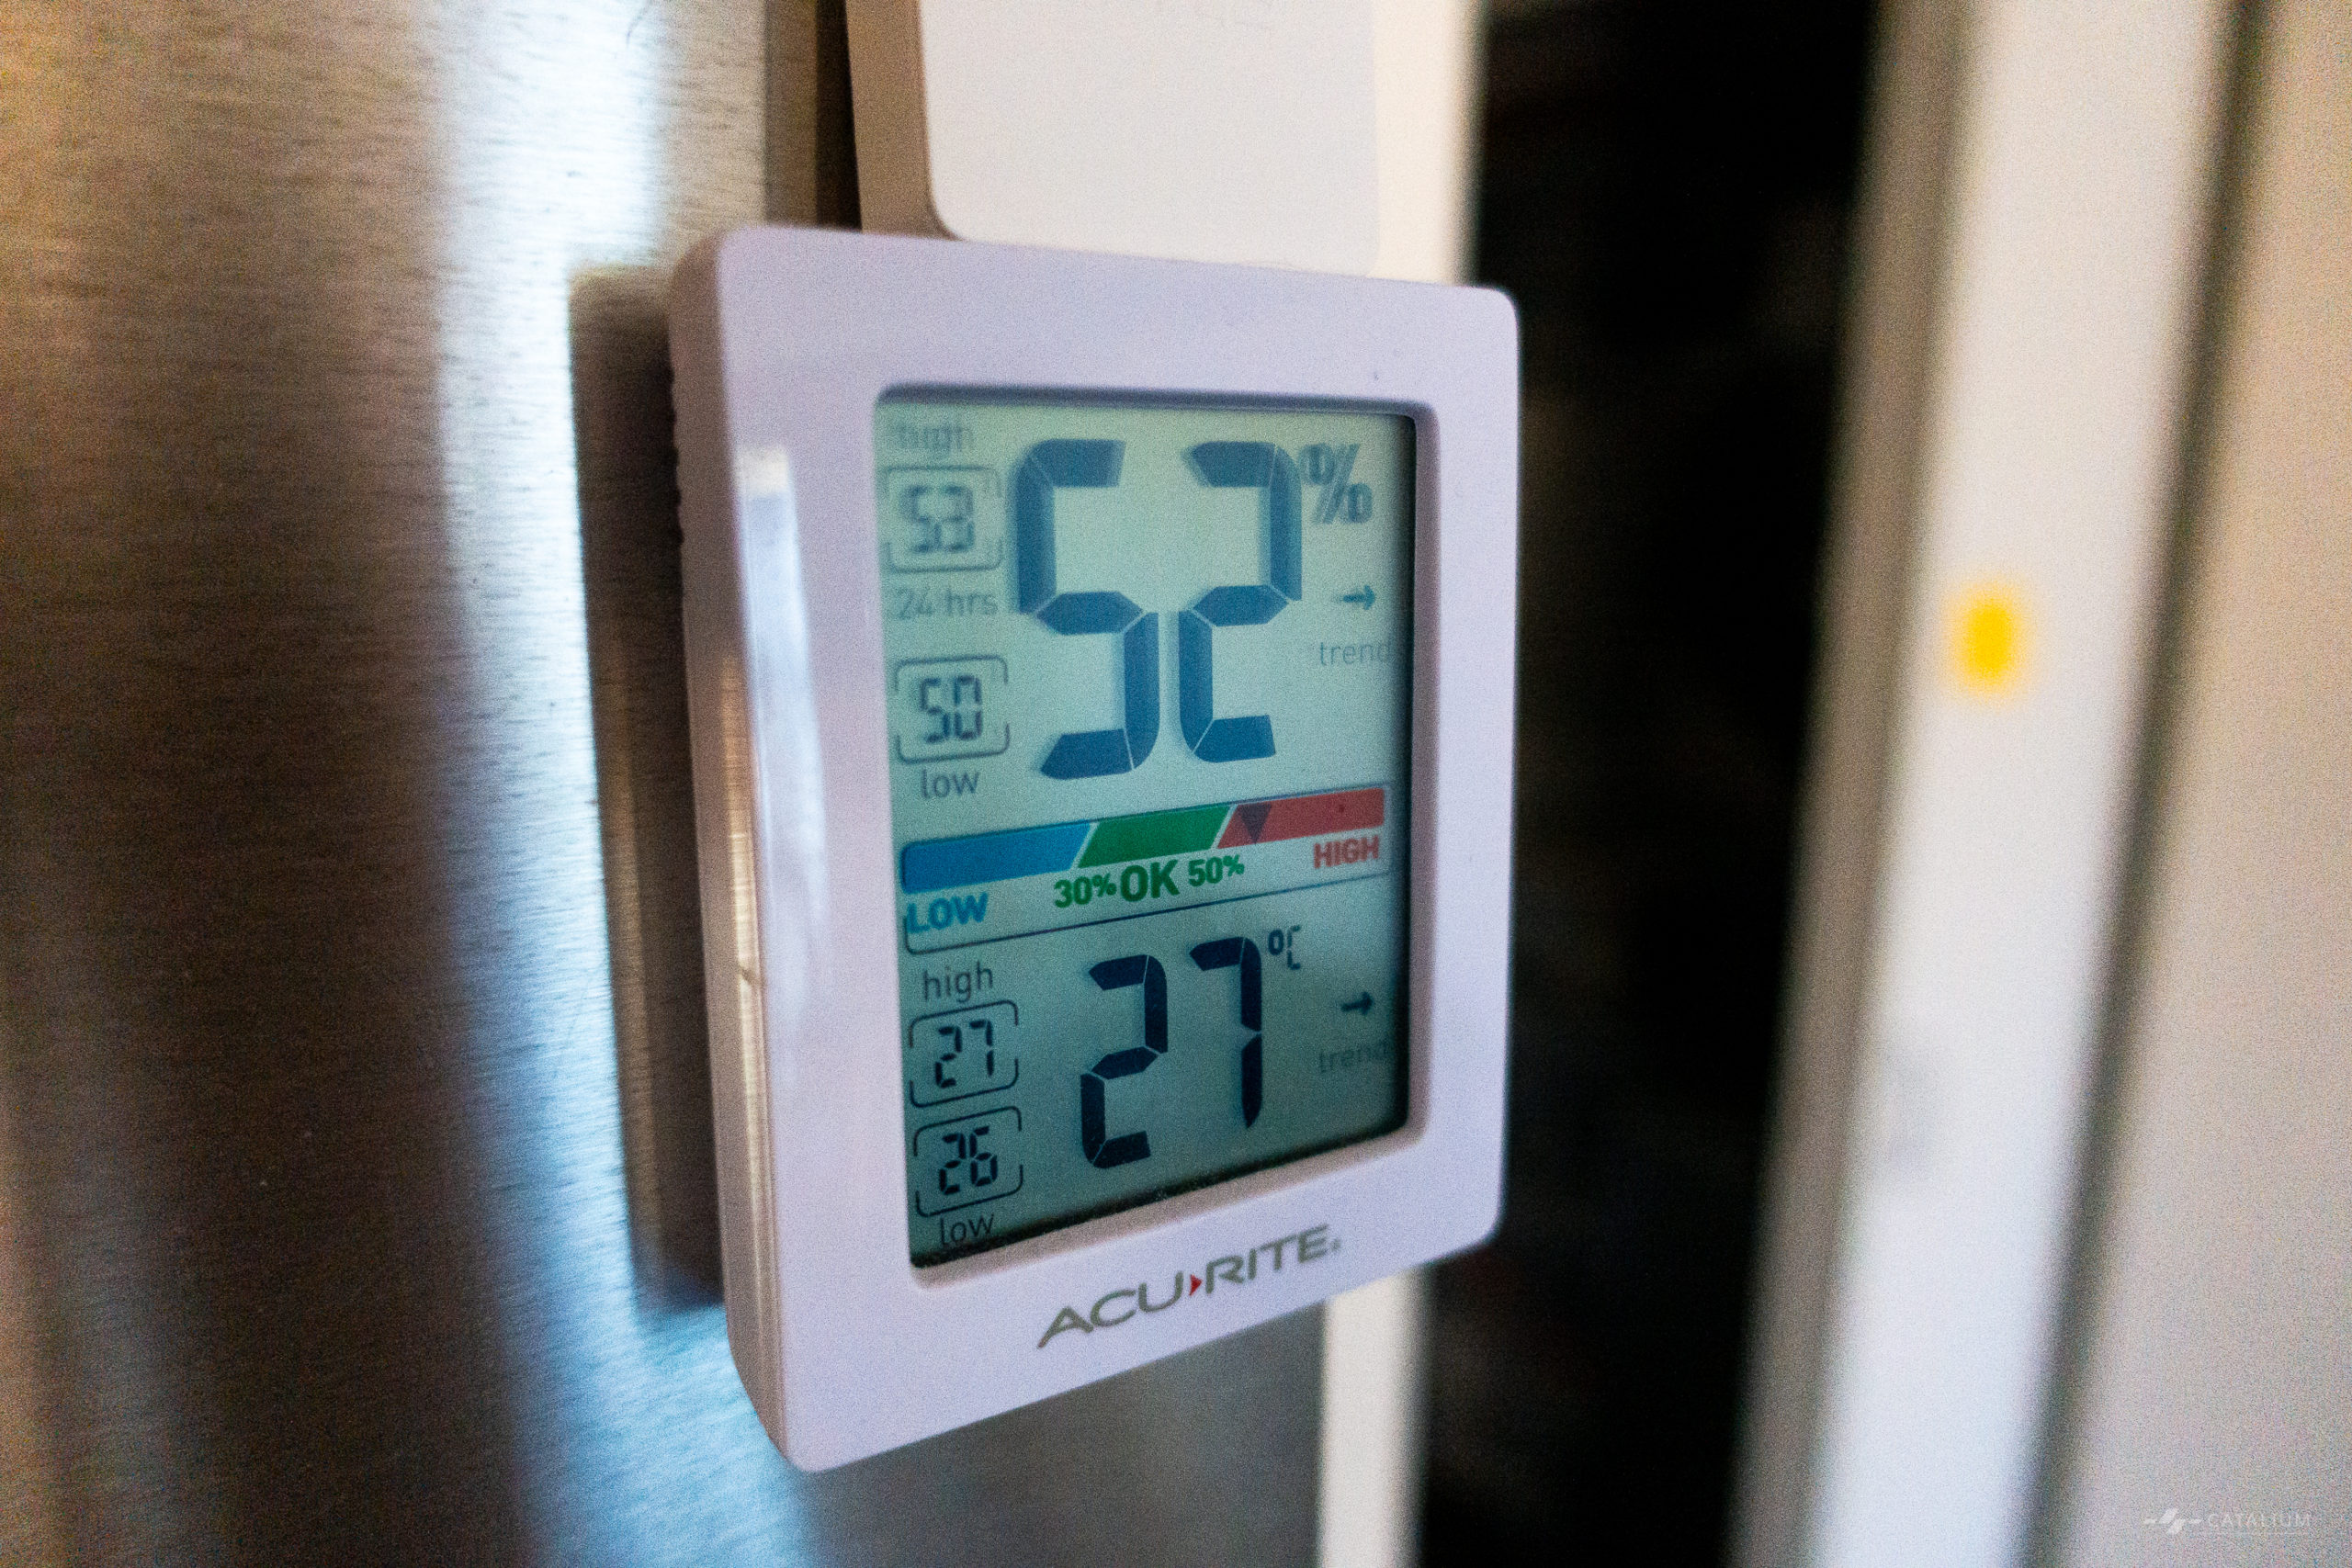 In the meantime, room temperature remained 27ºC / 80ºF